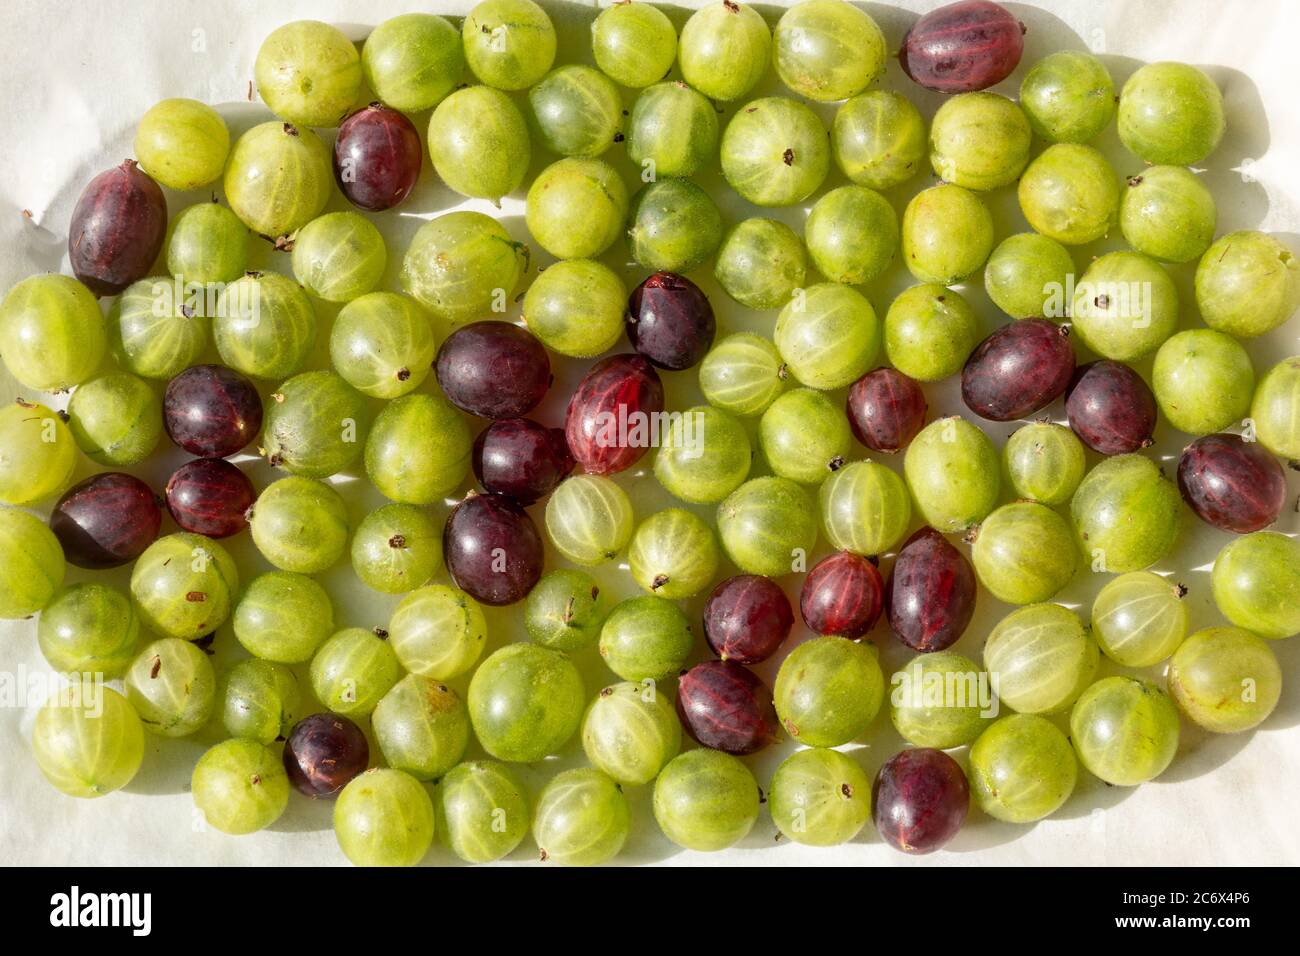 Mixed green and red gooseberries spread out on a tray with baking paper in preparation for home freezing Stock Photo